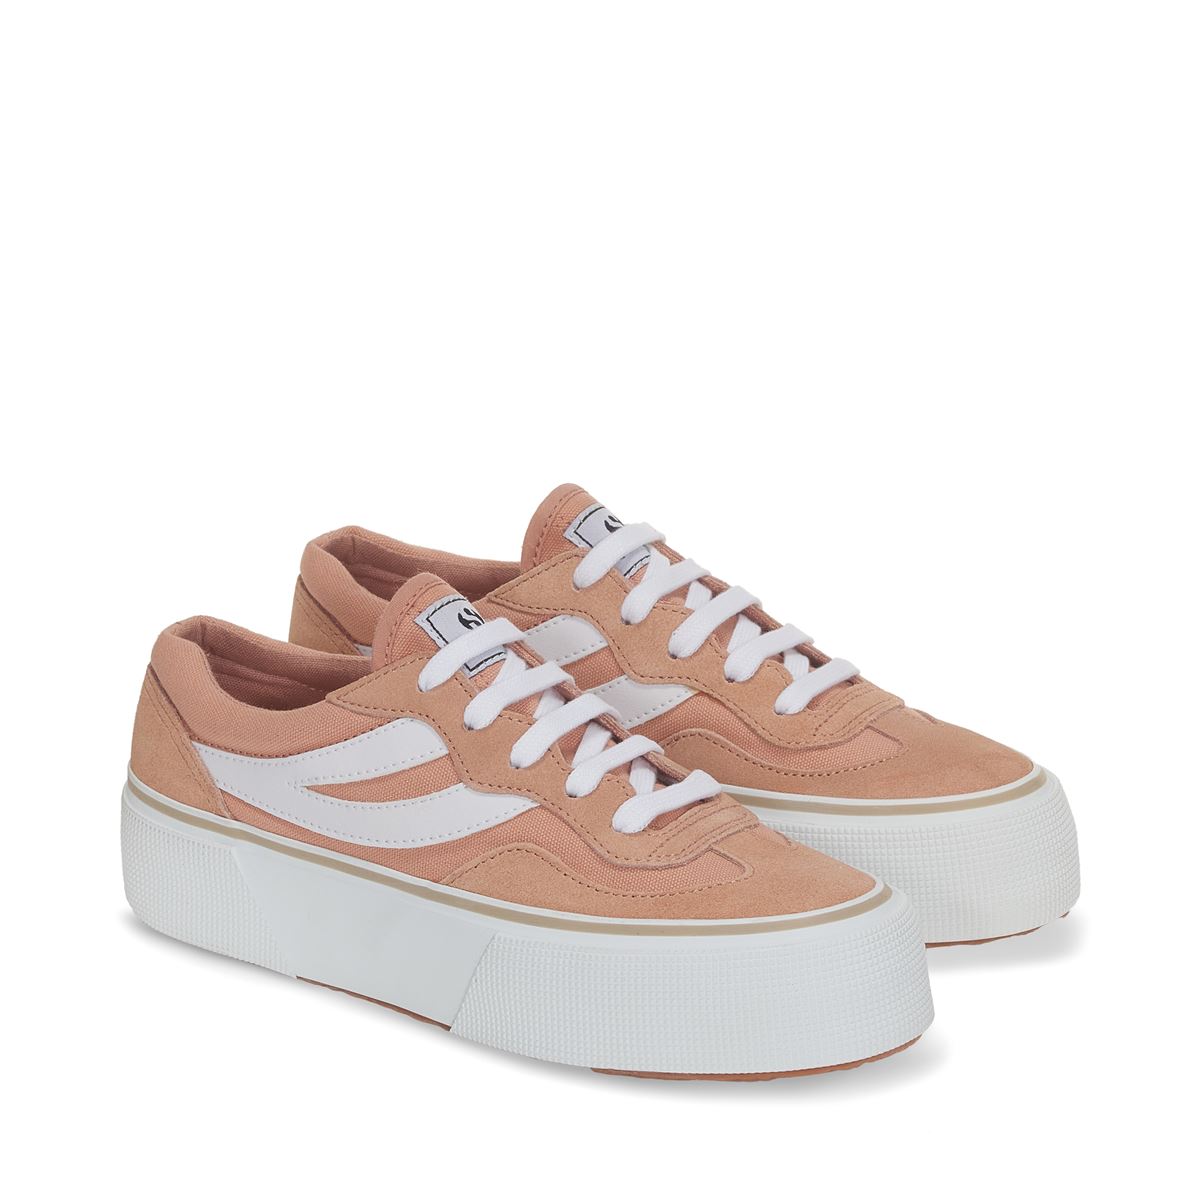 3041 REVOLLEY COLORBLOCK PLATF ROSE DUSTY- Hover Image